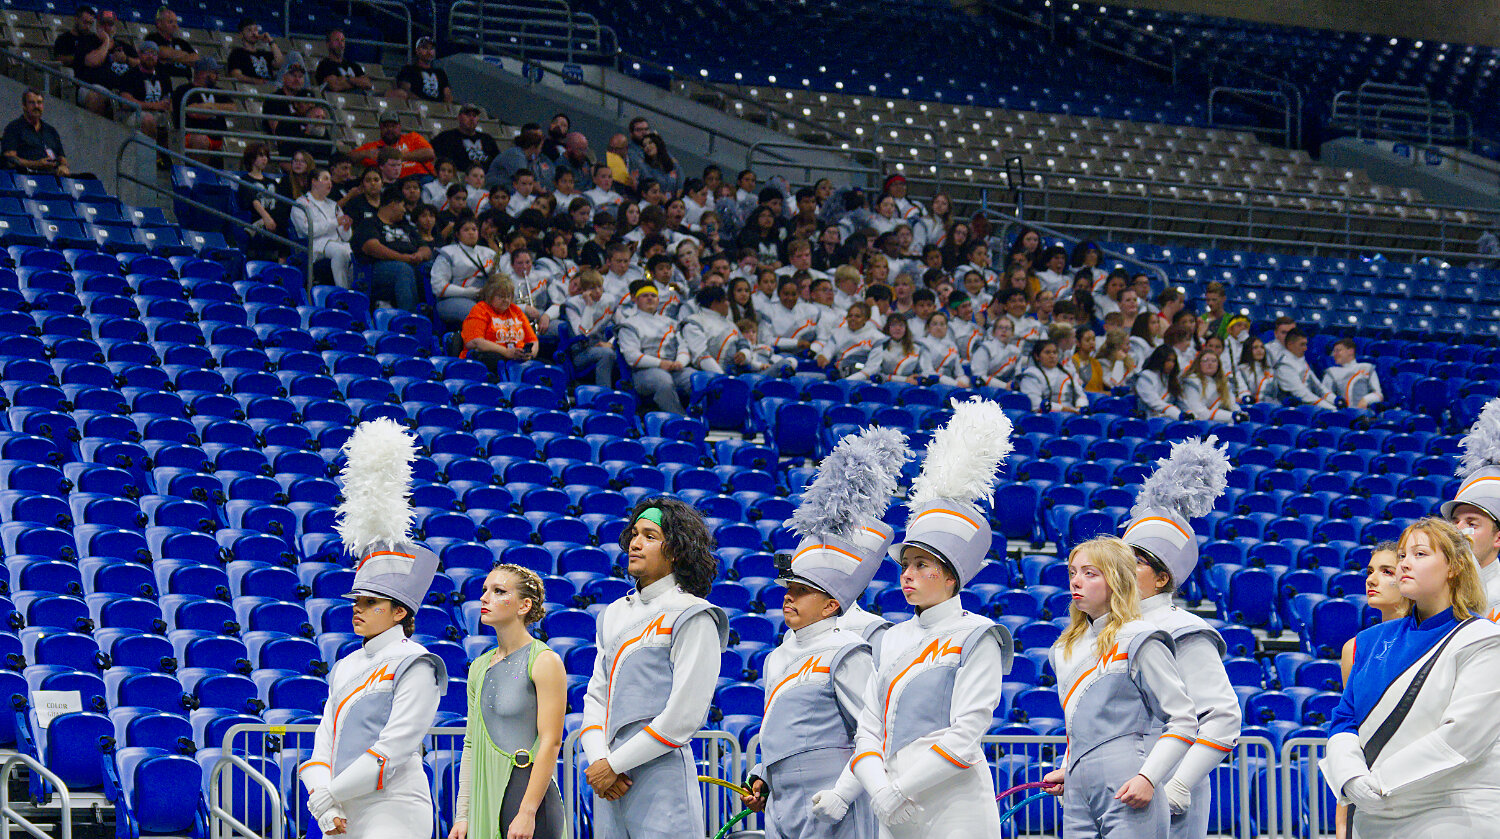 The band's leadership team represents the Sound of the Swarm on the field, as the band members and crew wait in the stands to hear their name announce after prelims and learn what time they will march in the finals.